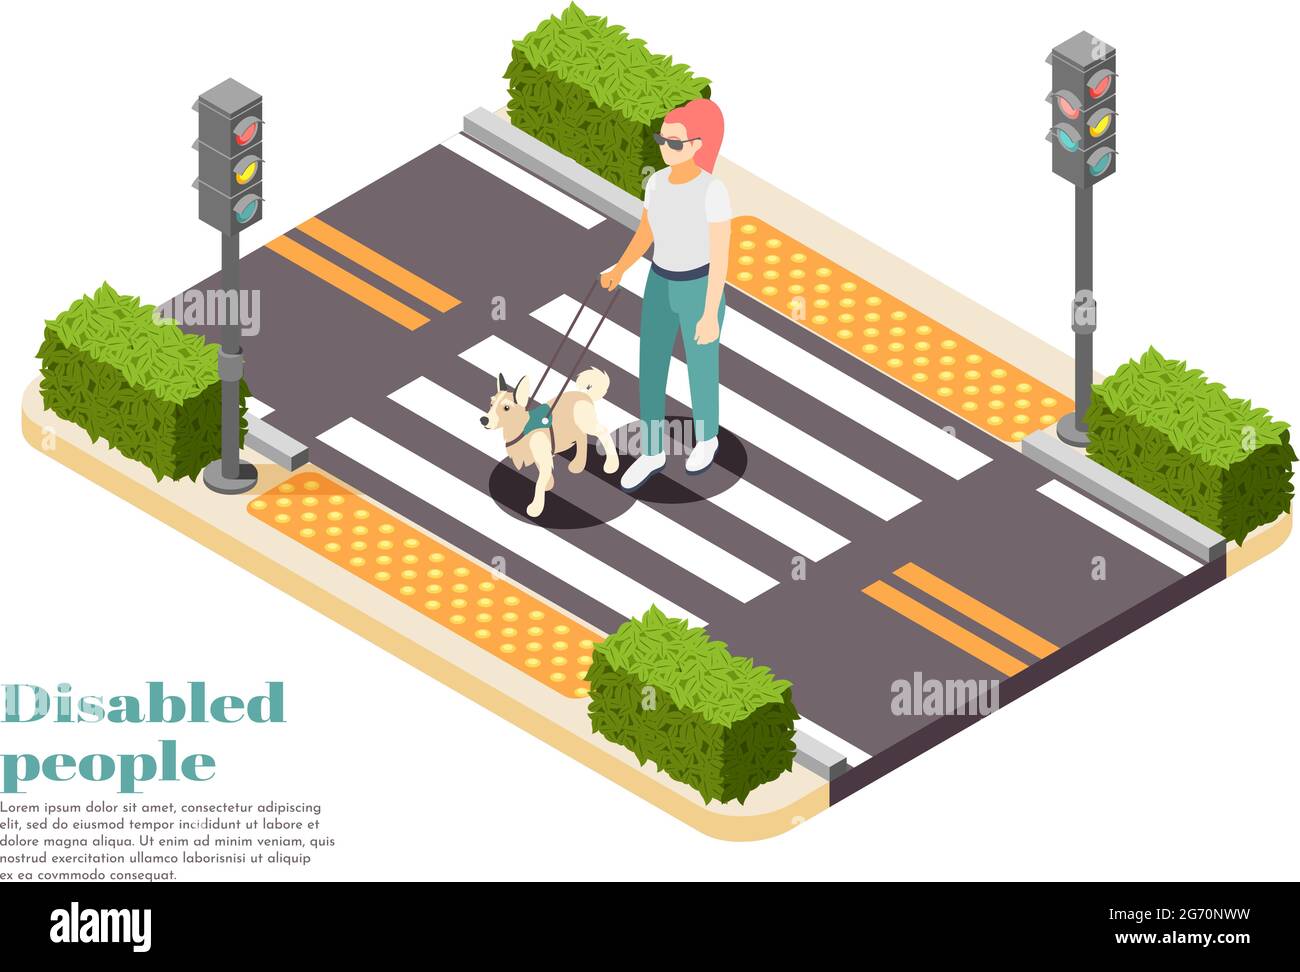 Disabled people isometric background with dog guide taking blind woman across road vector illustration Stock Vector